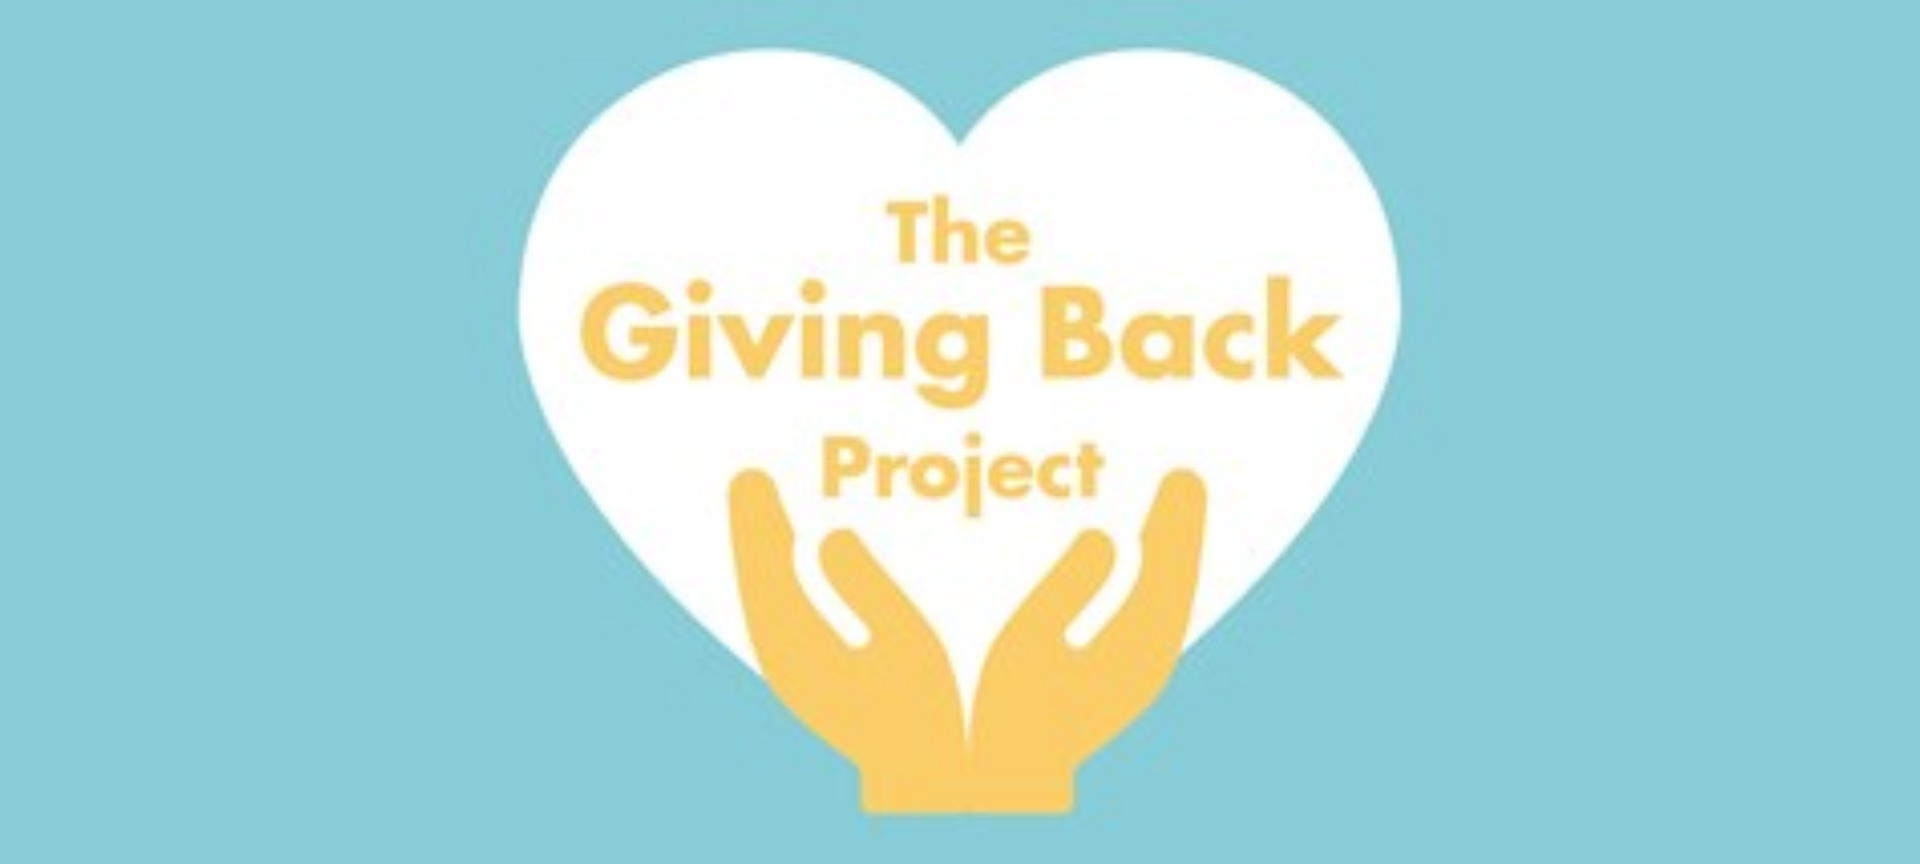 giving back project logo